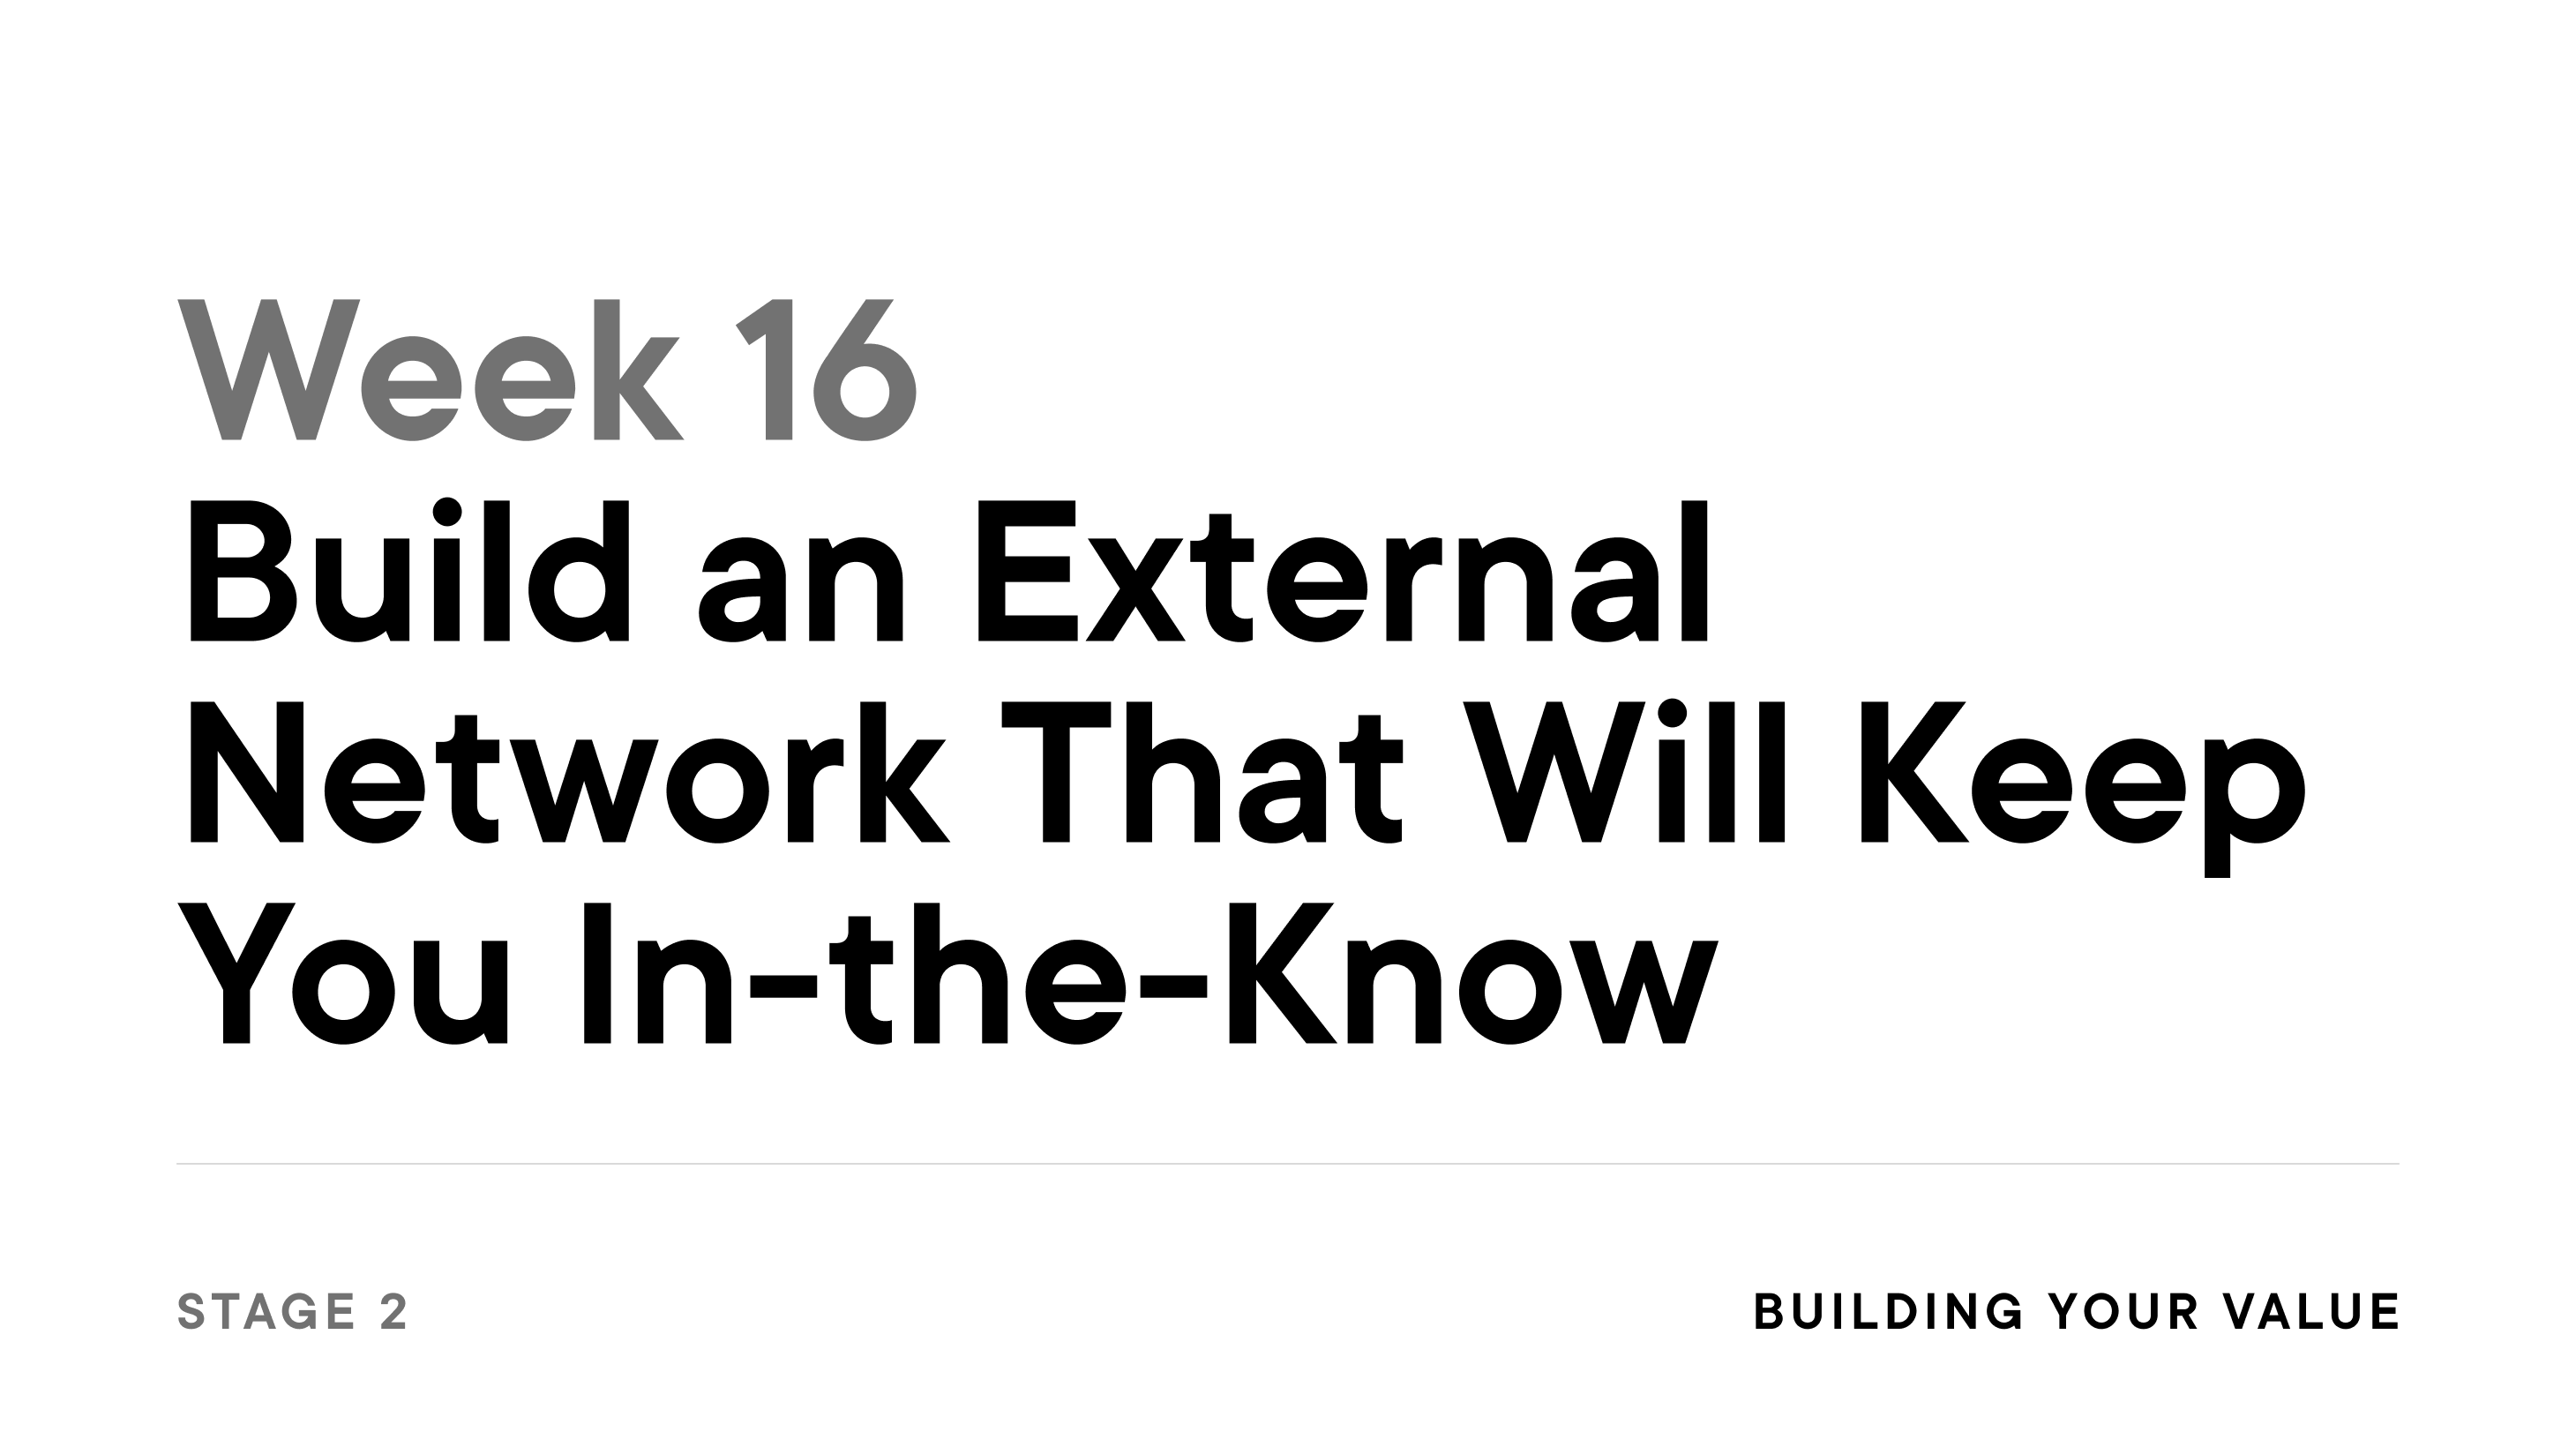 Week 16: Build an Eternal Network That Will Keep You In-the-Know